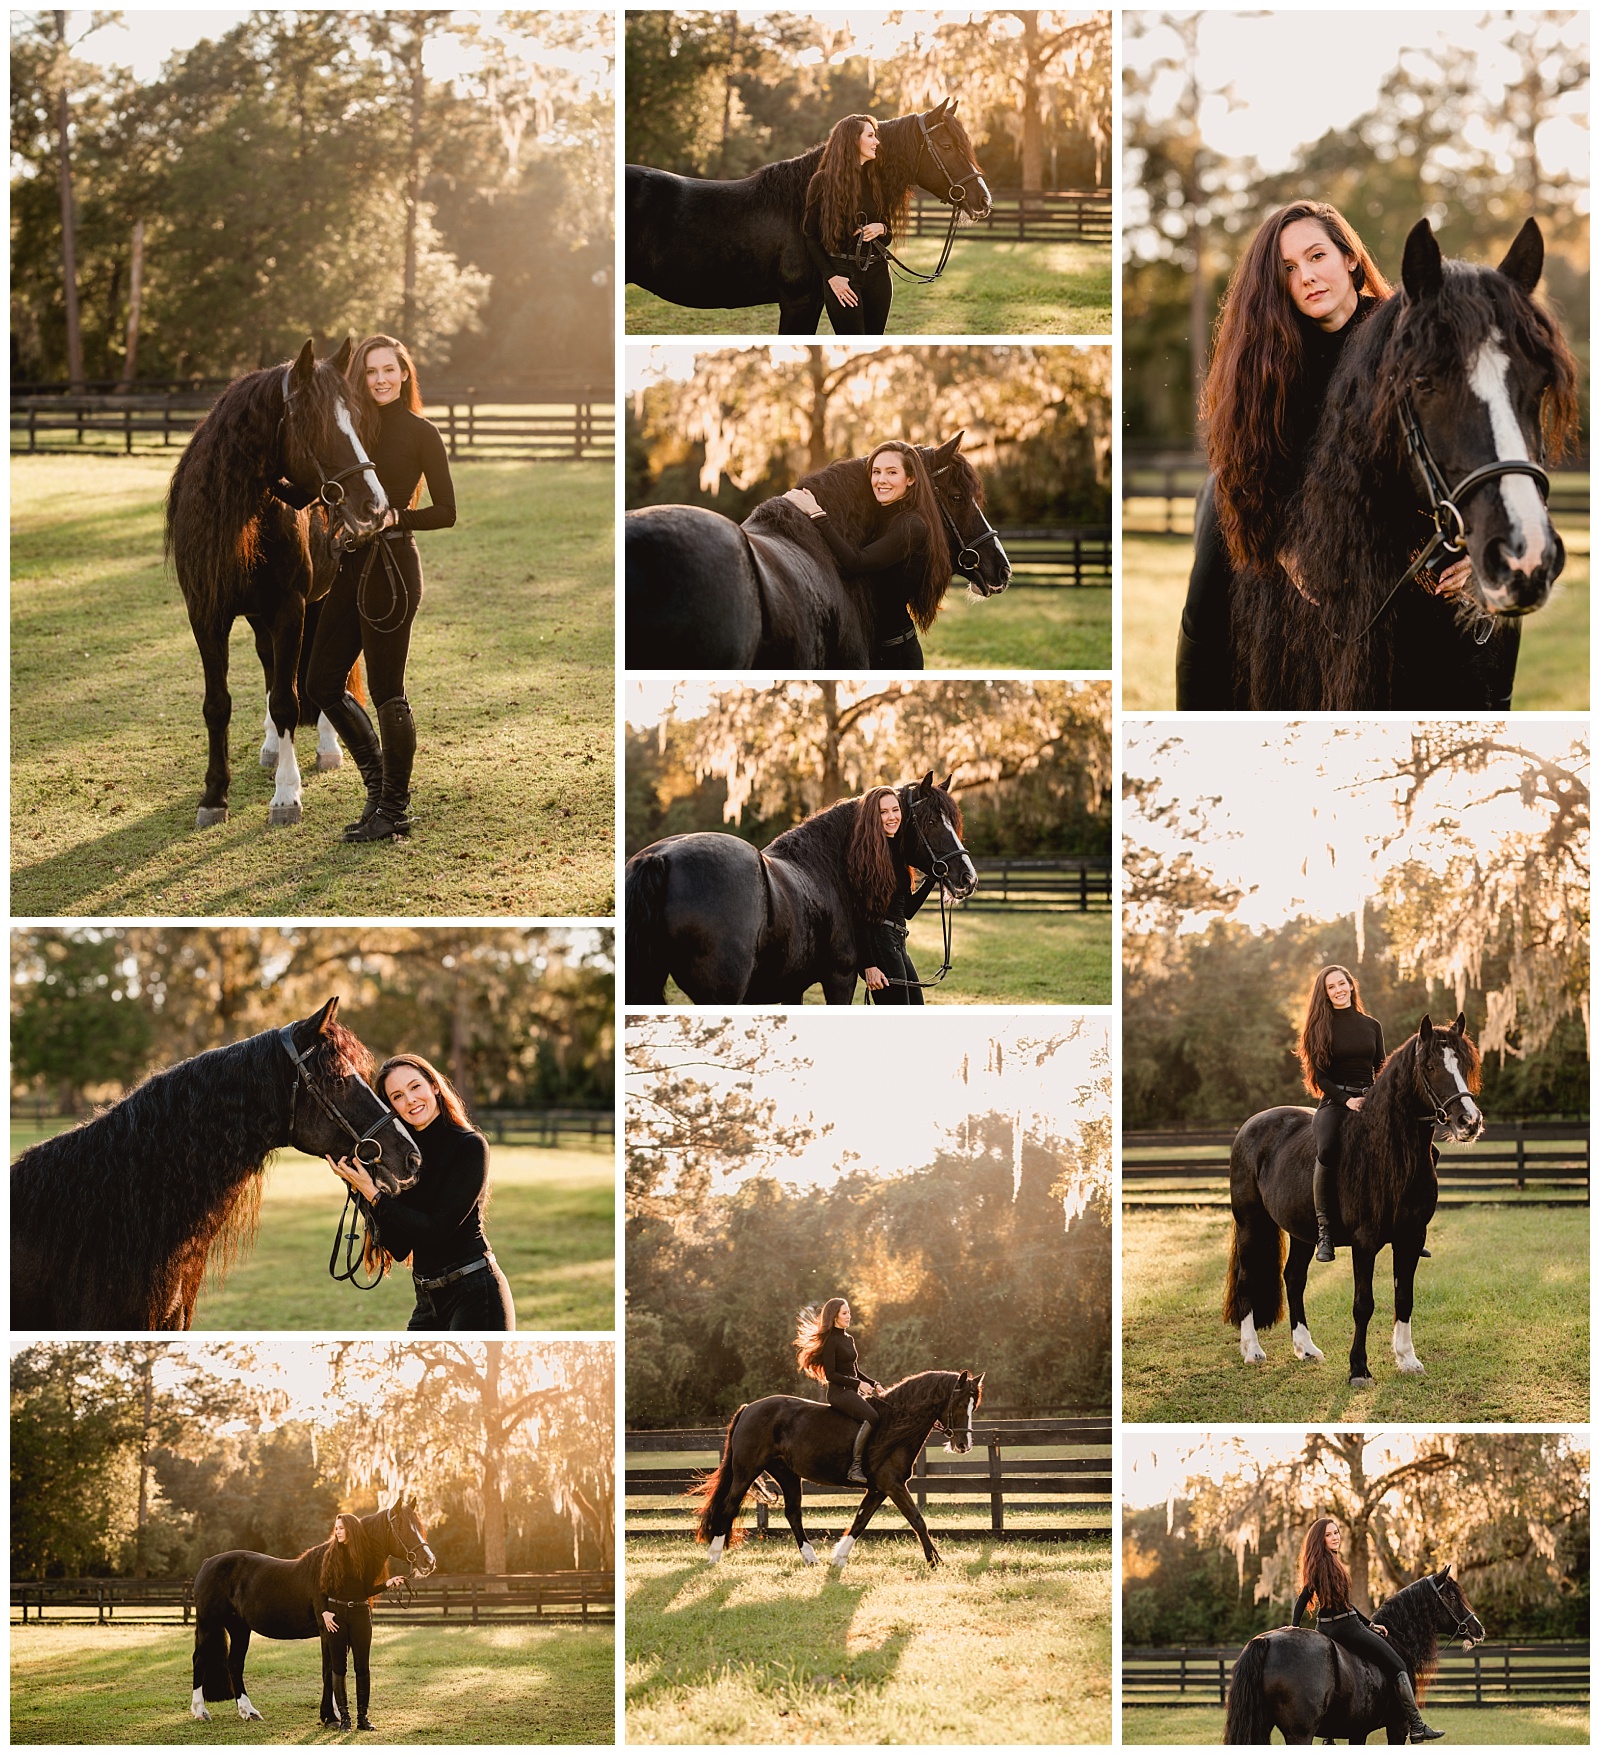 Fun horse and rider photoshoot near Tallahassee, Florida during the golden hour with woman and her dressage pony.